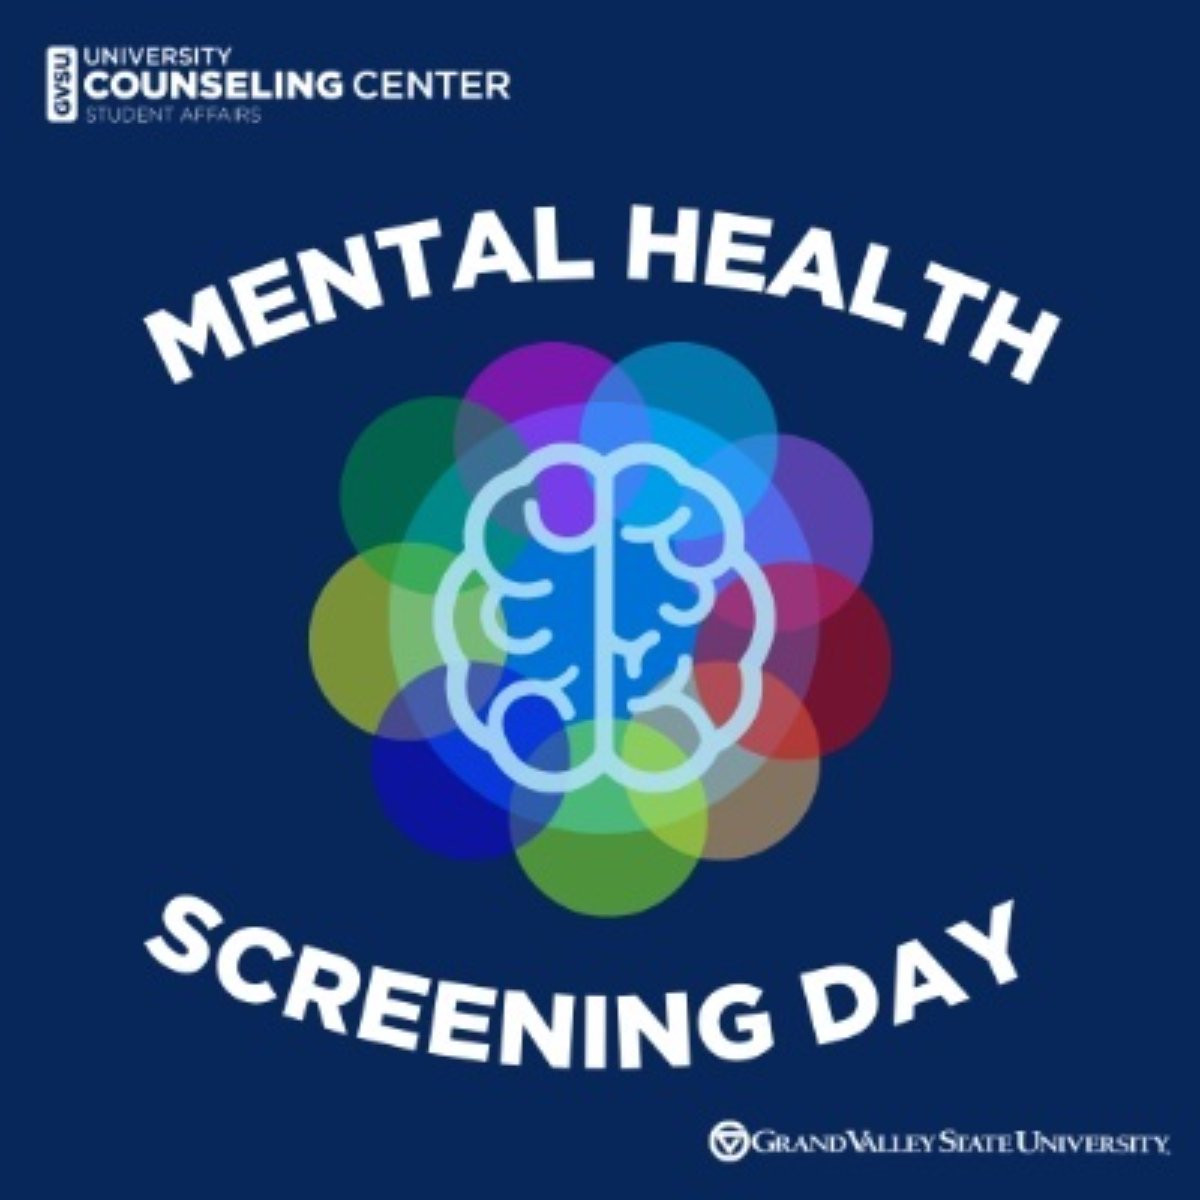 A colorful brain with text that reads Mental Health Screening Day with the GVSU University Counseling Center and GVSU logo